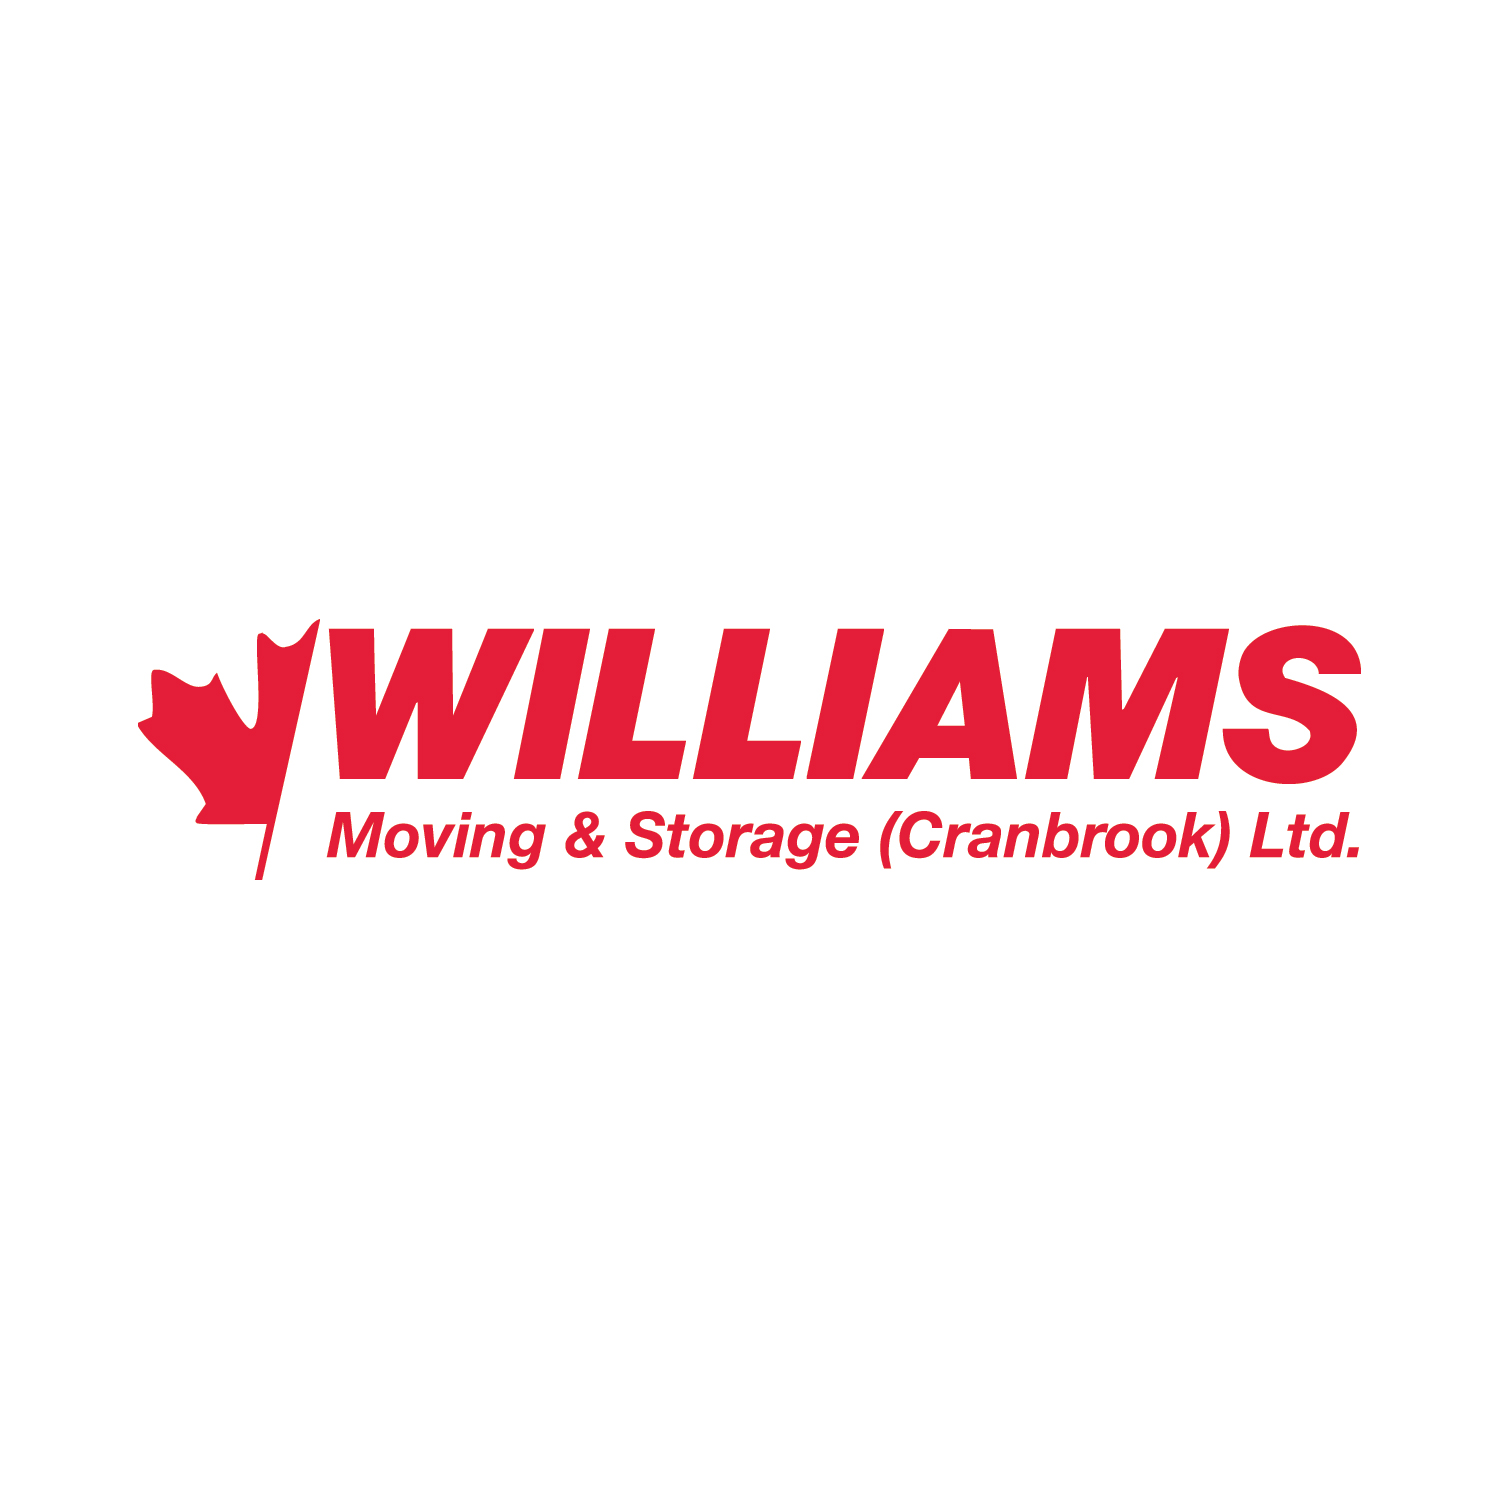 Williams Moving and Storage